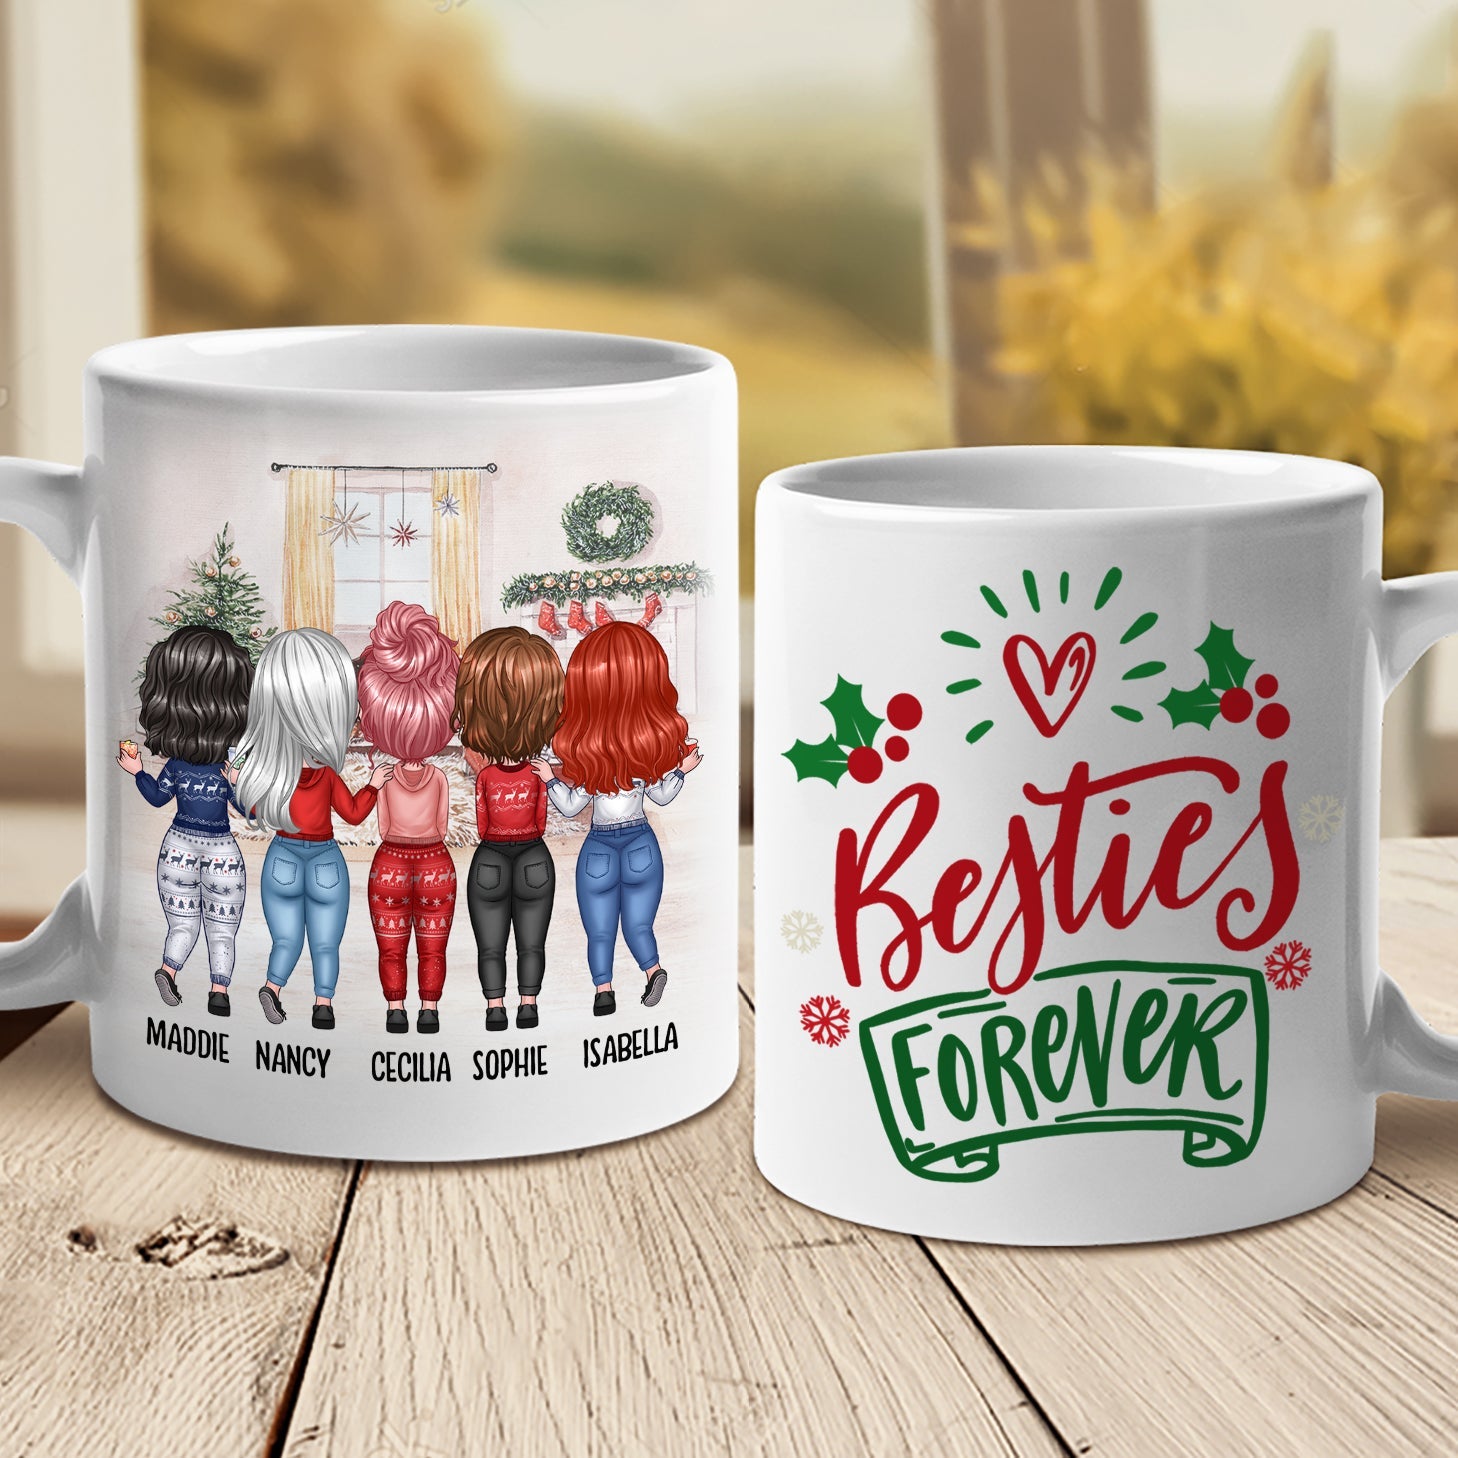 There Is No Greater Gift Than Friendship - Personalized Mug